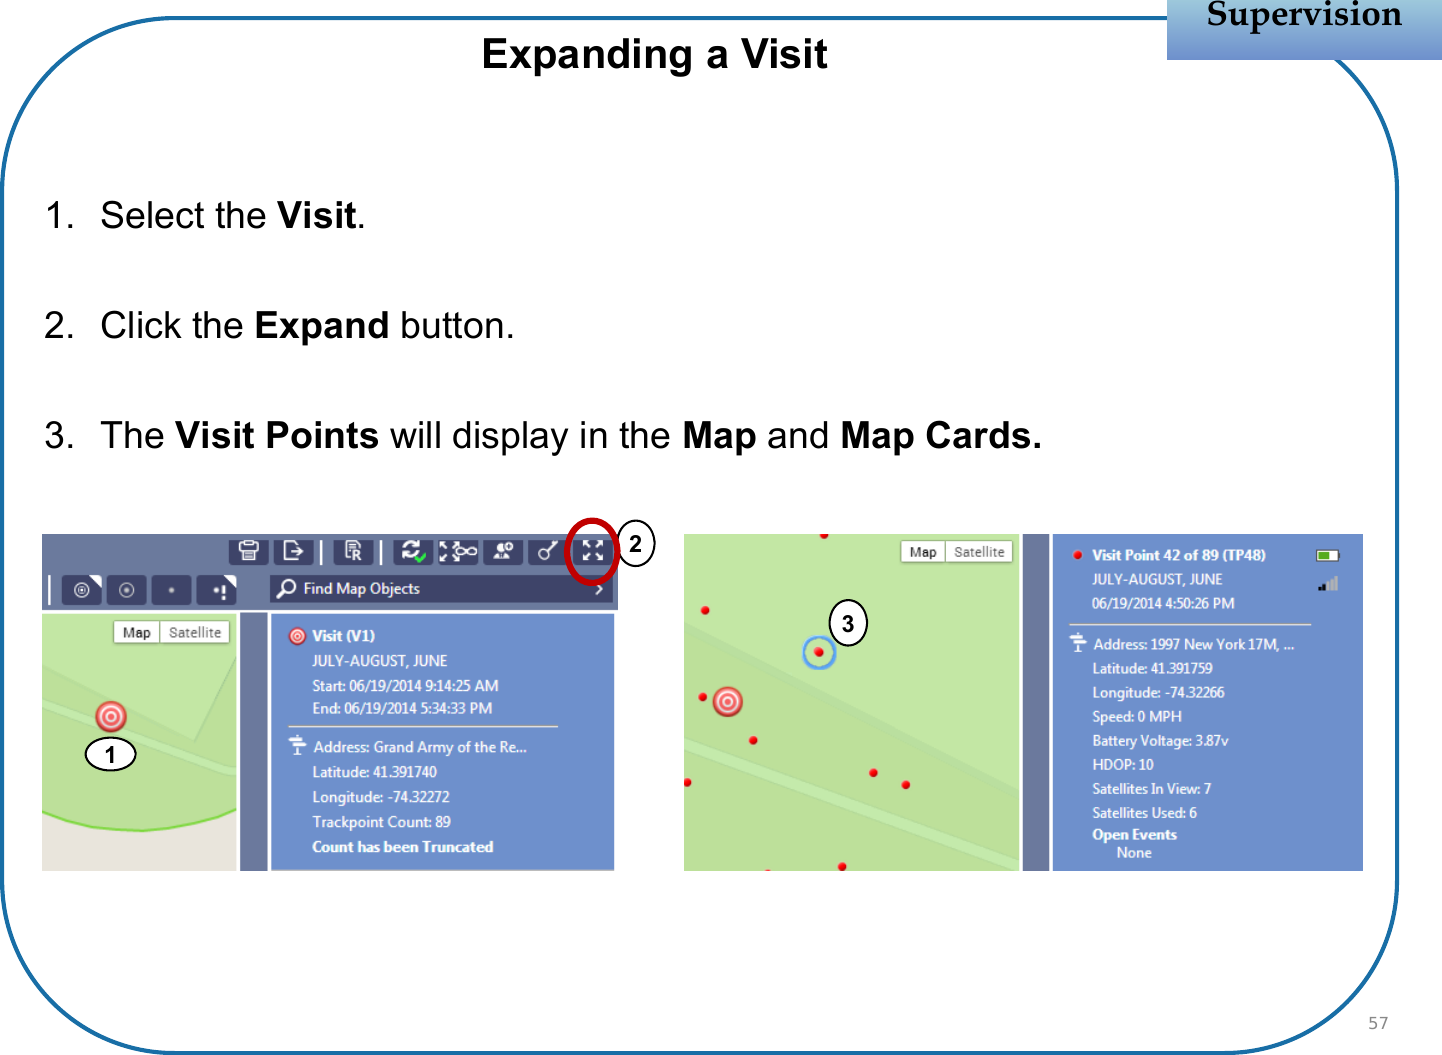 1. Select the Visit.2. Click the Expand button.3. The Visit Points will display in the Map and Map Cards.SupervisionSupervision57Expanding a Visit123